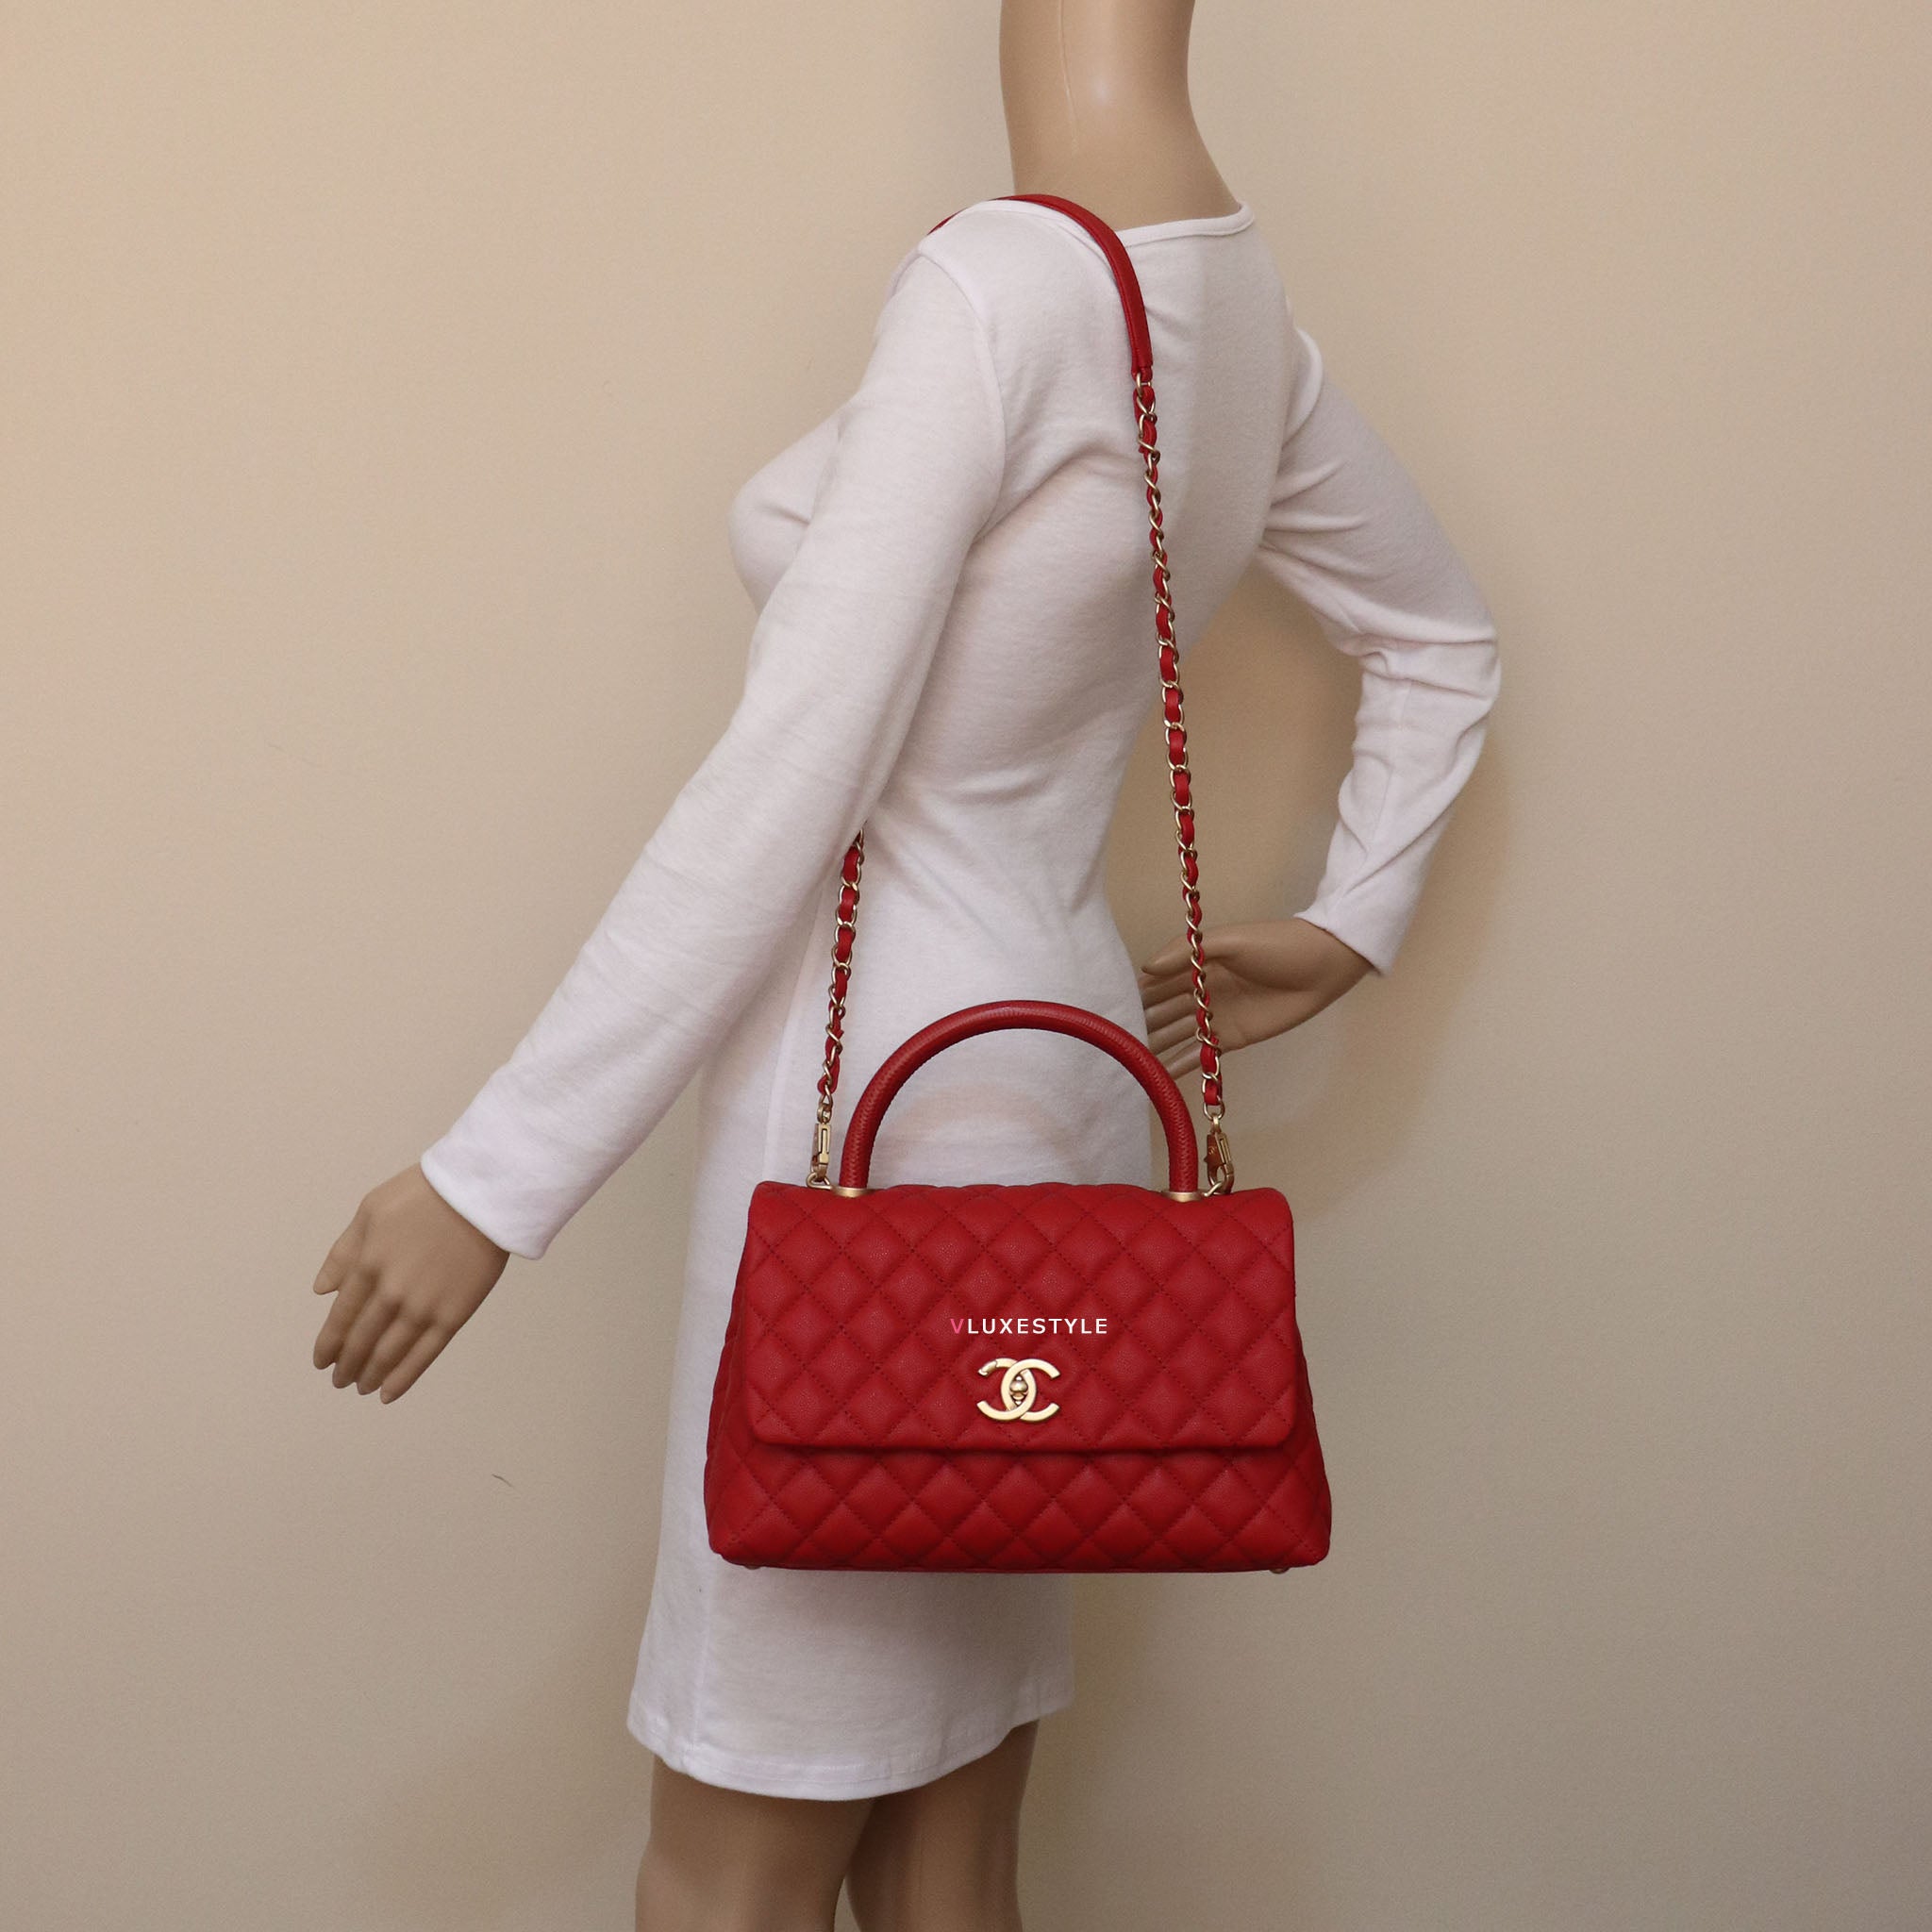 Chanel Coco Handle Small 19a Red Quilted Caviar With Brushed Gold Hard Vluxestyle